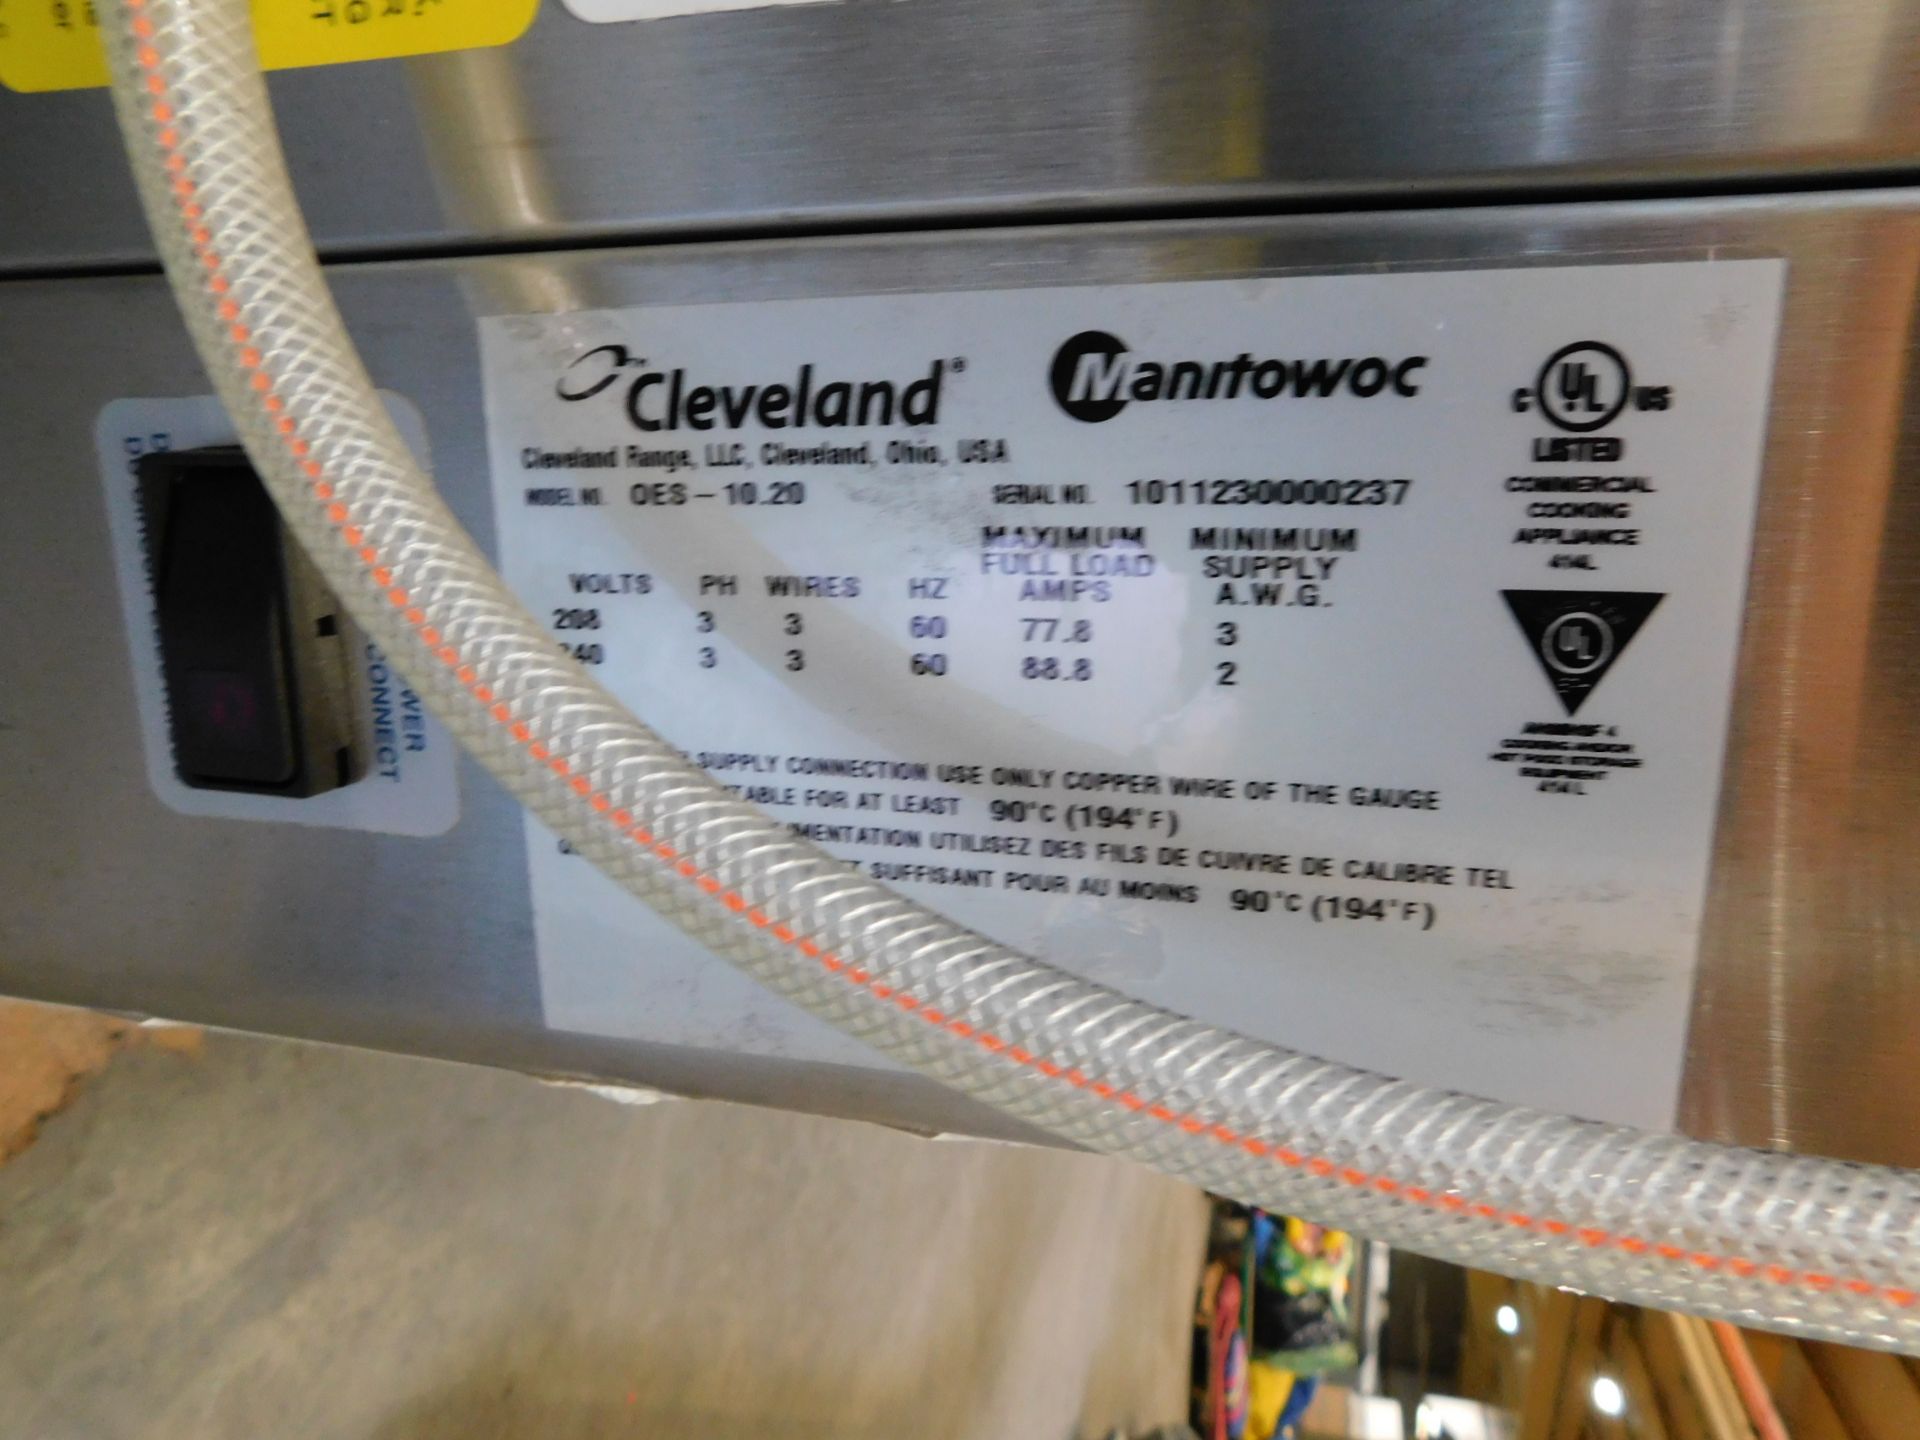 "NEW" Cleveland Convotherm 10.2 Series, model no. 0ES-10.2, 208/240 , 3 phase - Image 6 of 6